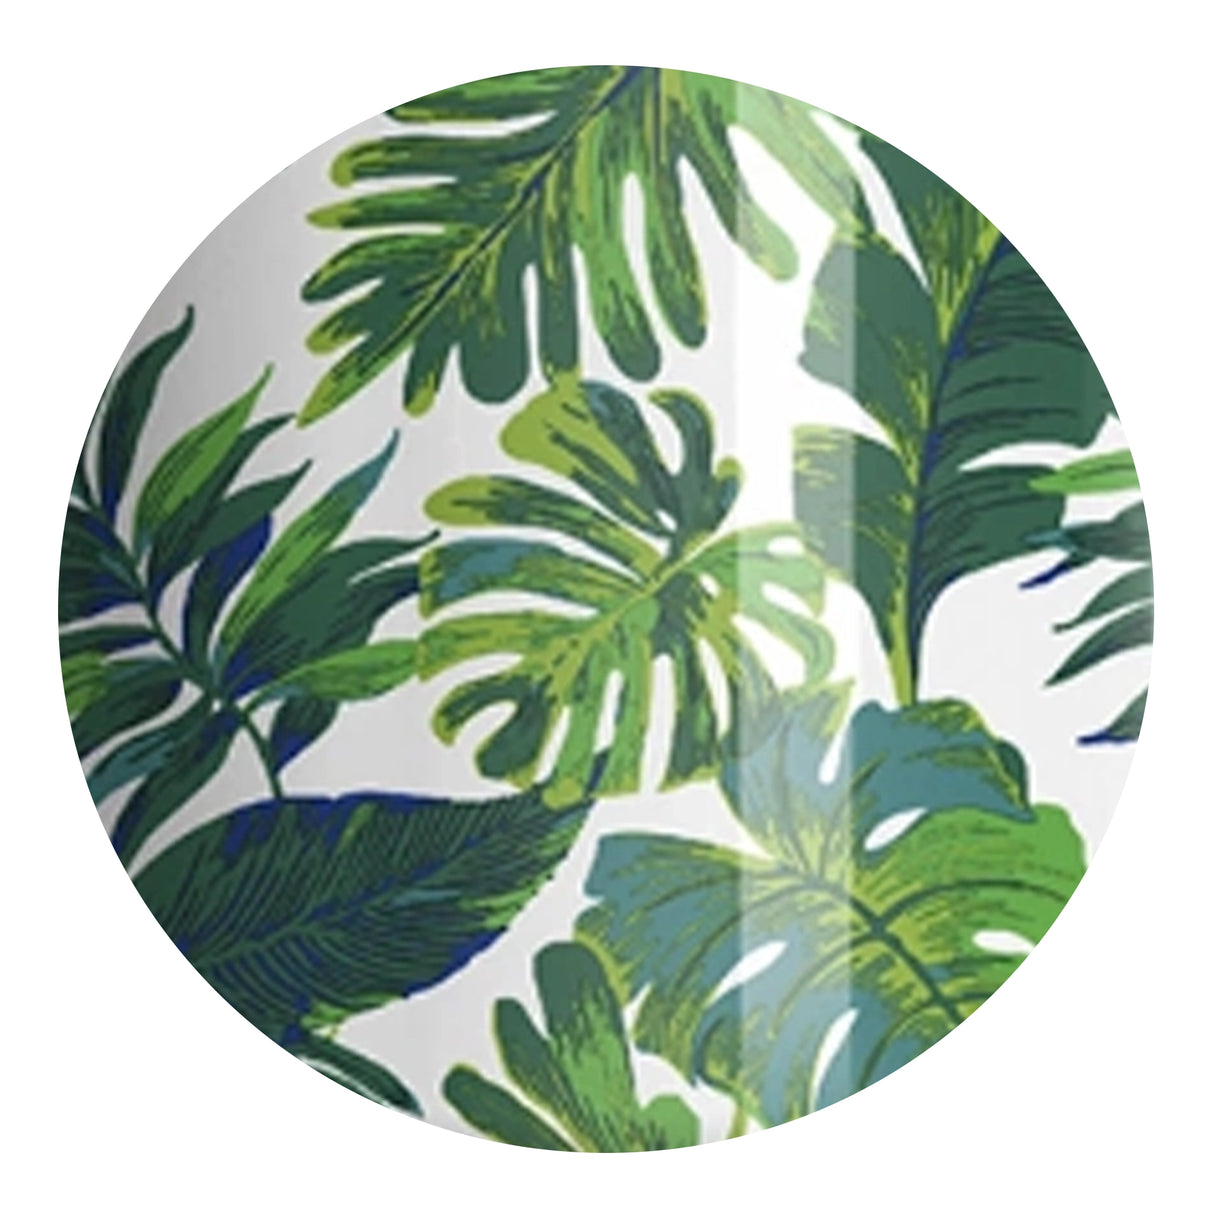 Hydro Sublimation Transfer Paper - Green Tropic Leaves